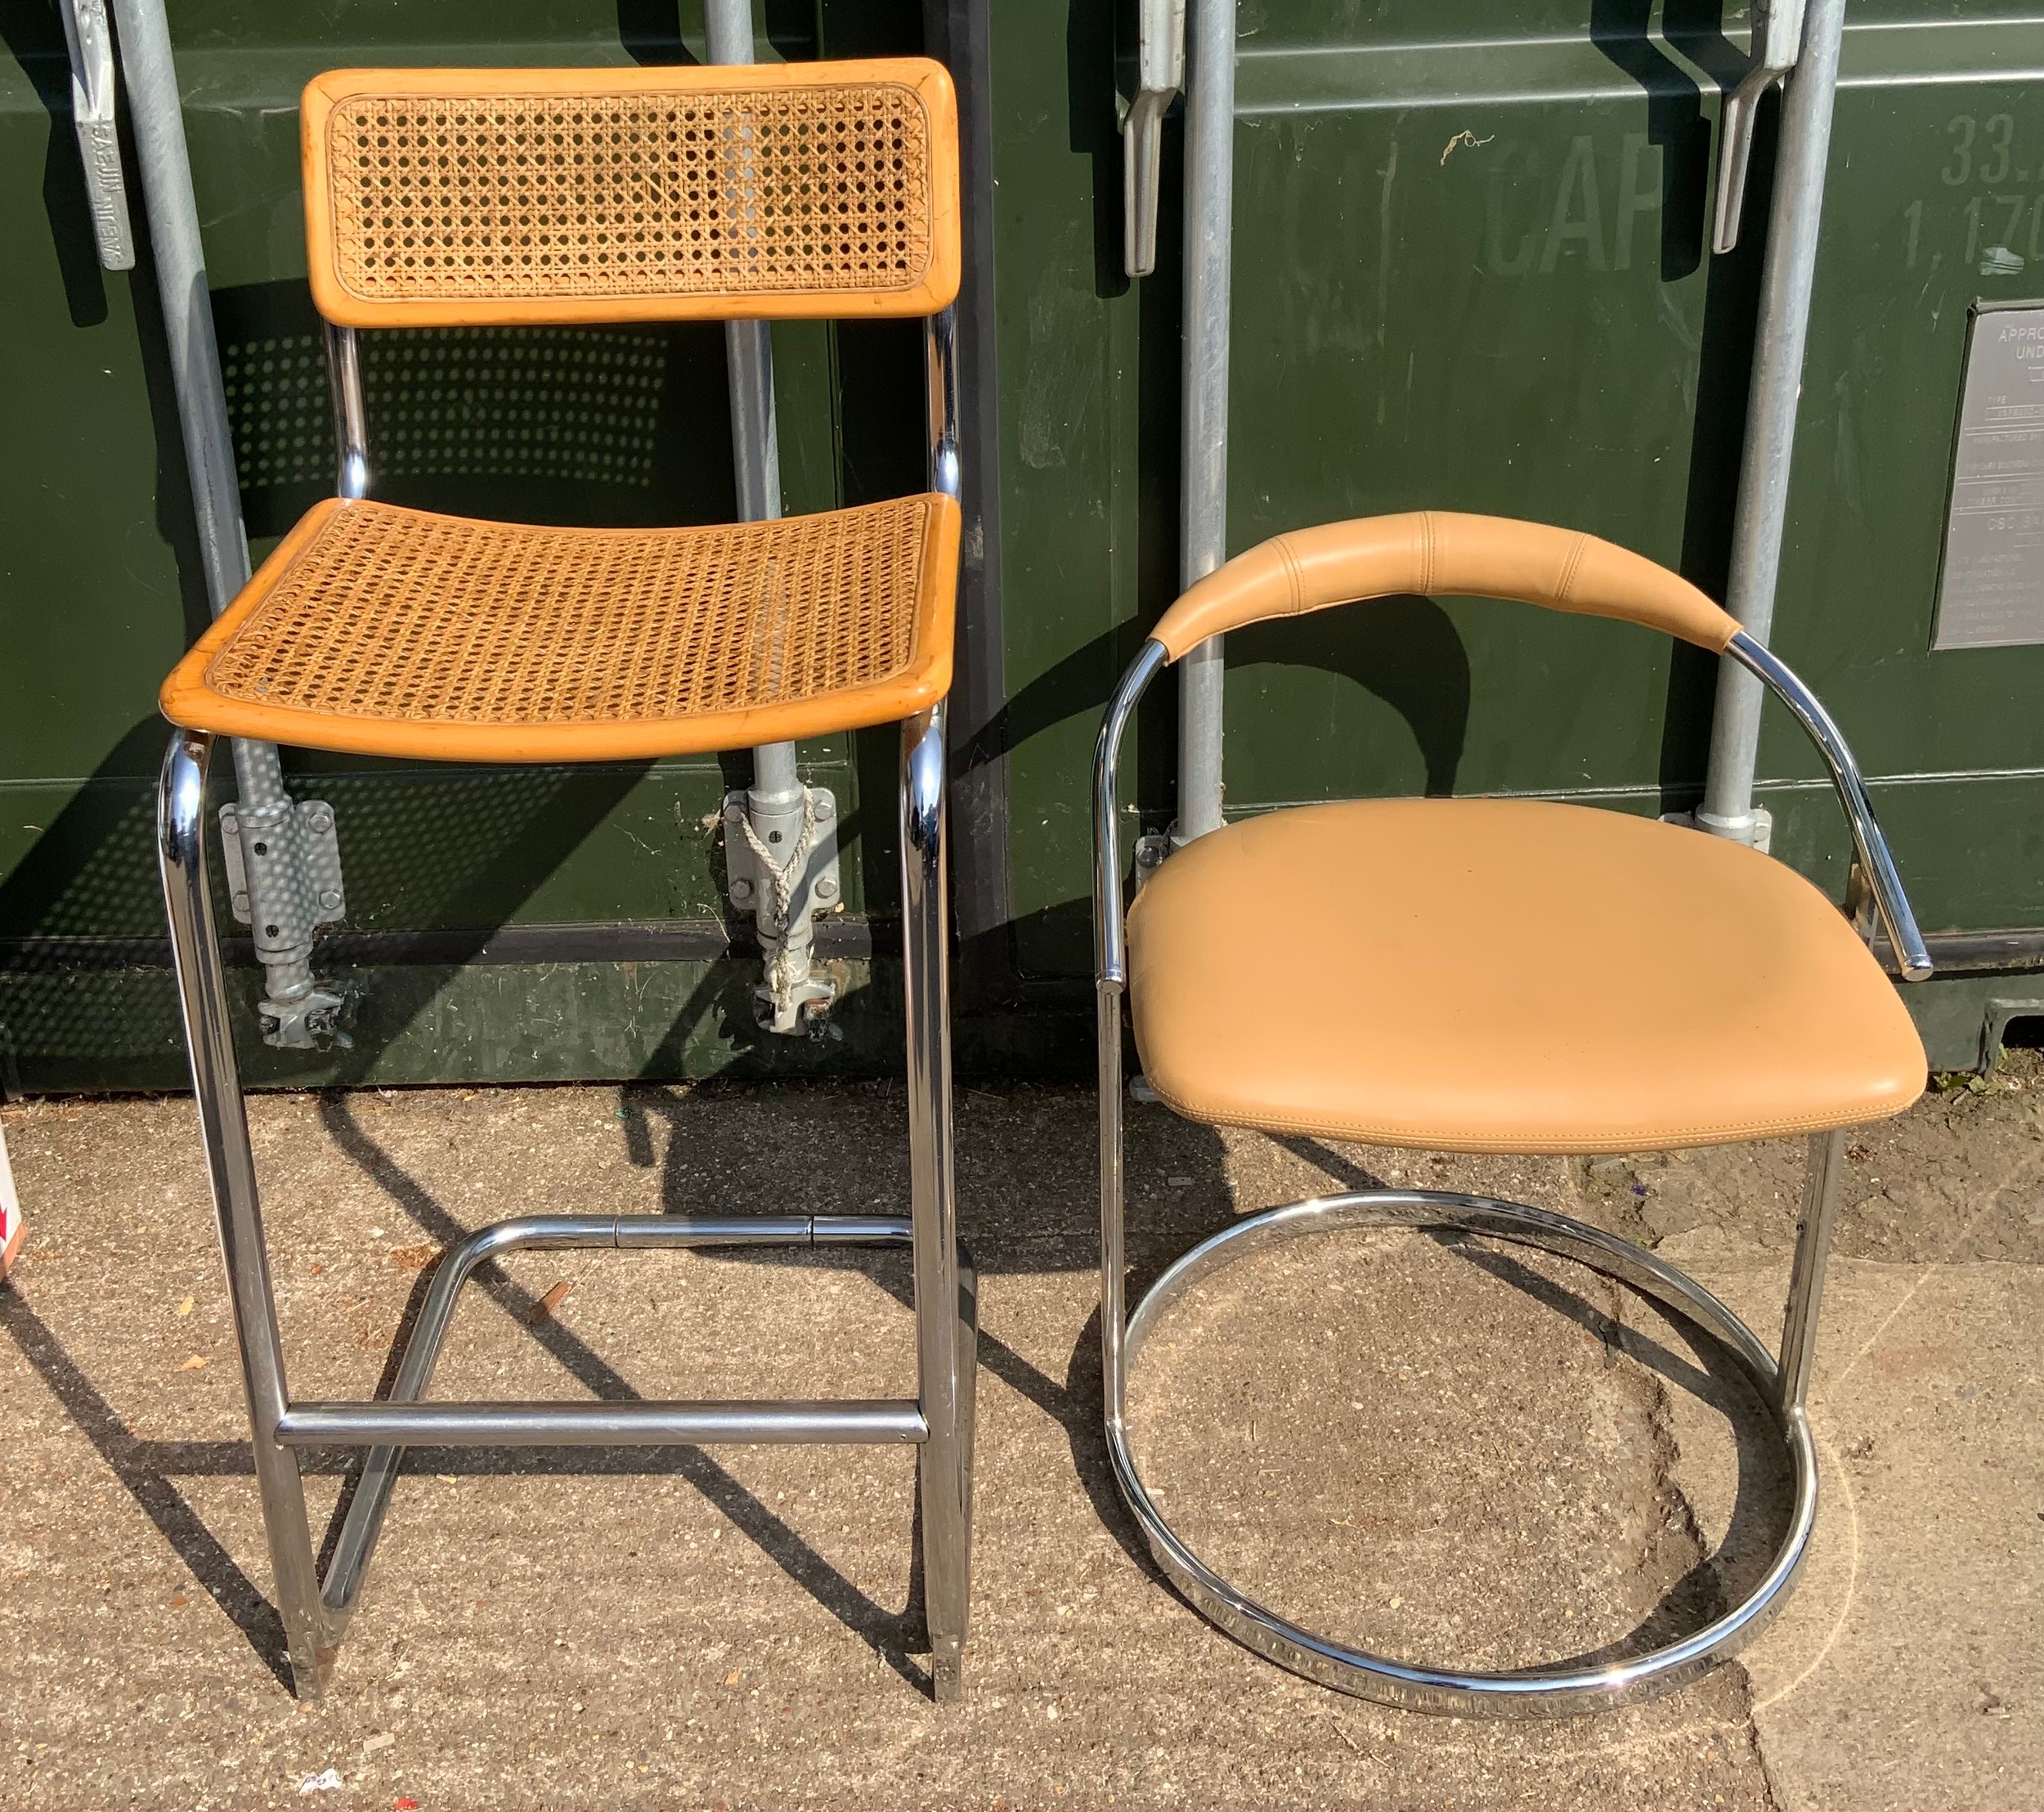 Low Leatherette Stool and High Back Wicker/Metal Stool